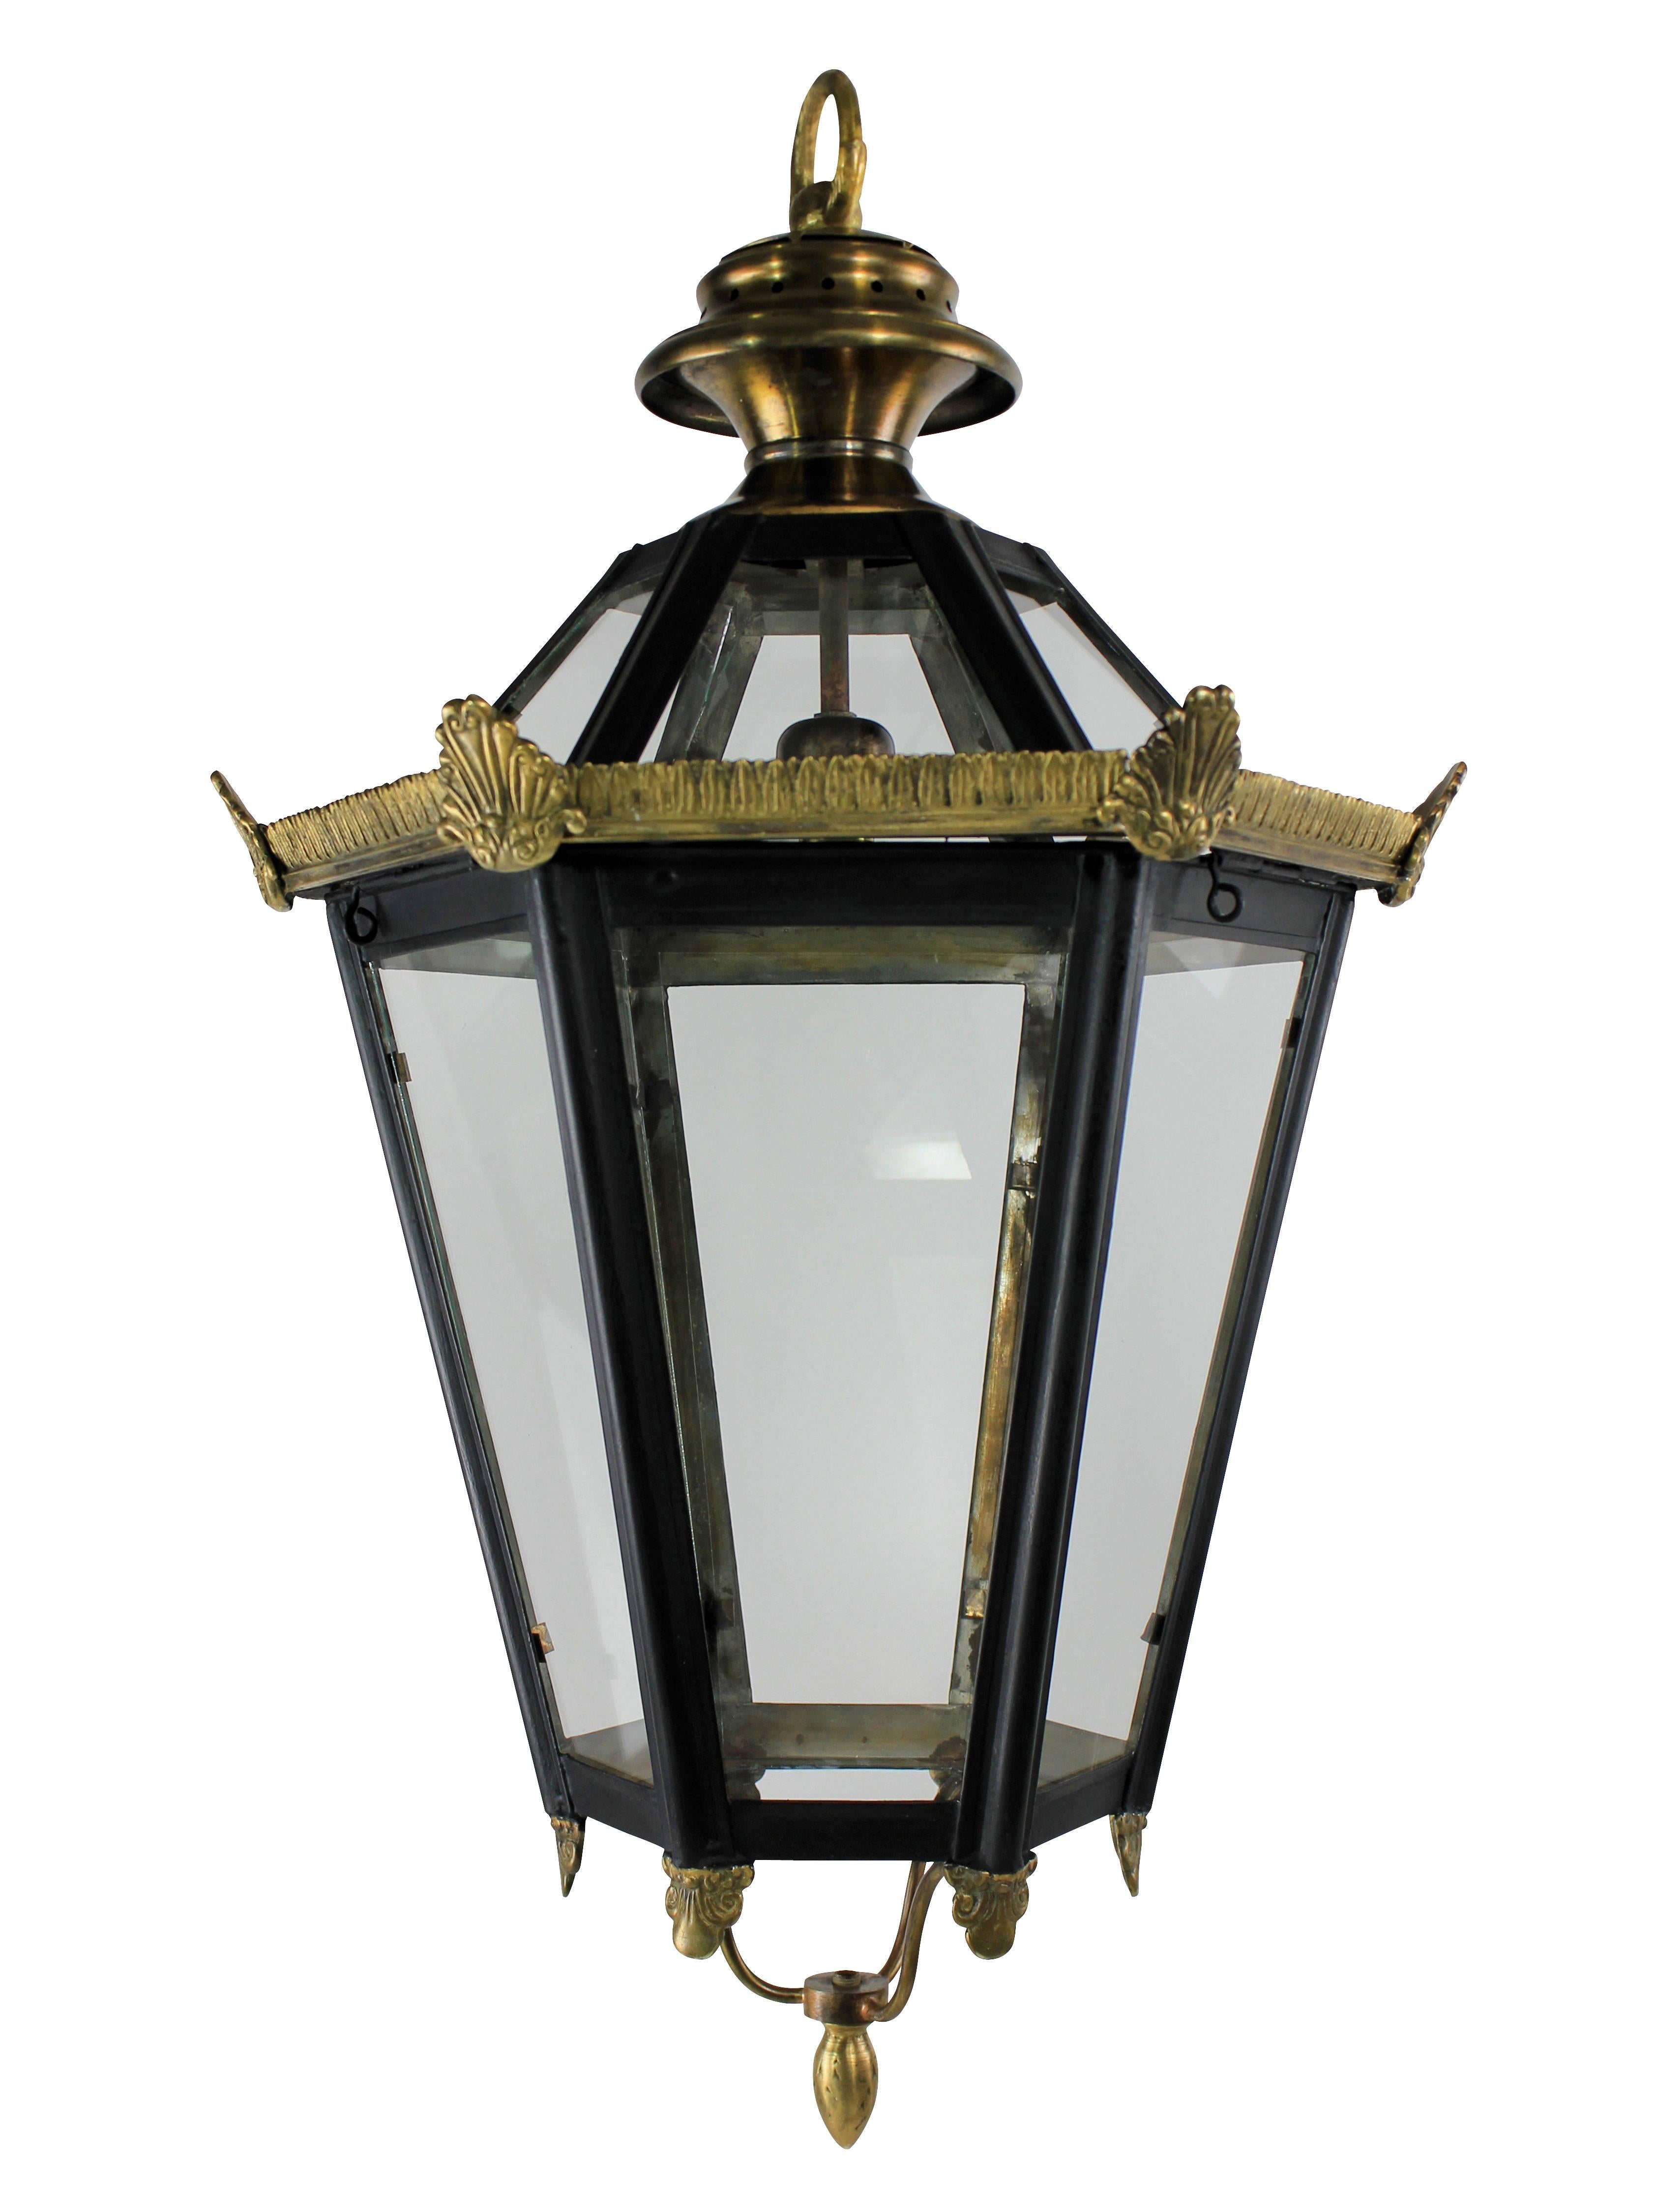 A pair of English hexagonal tapering hanging lantern in painted tole and brass with glazed panels

Newly electrified

Subjected to VAT.